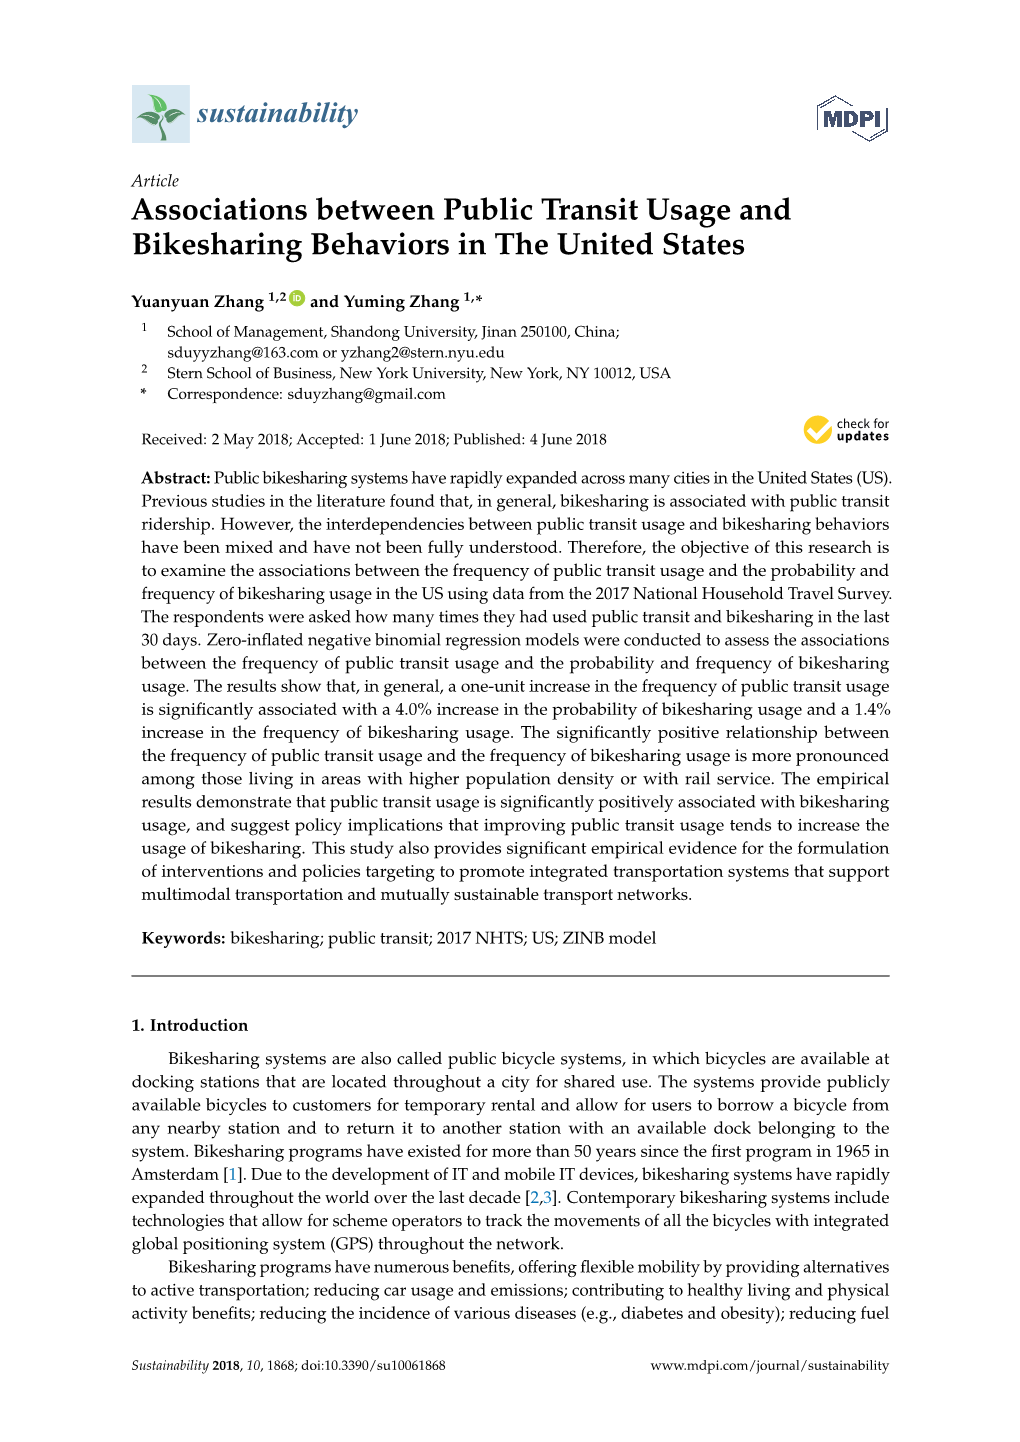 Associations Between Public Transit Usage and Bikesharing Behaviors in the United States